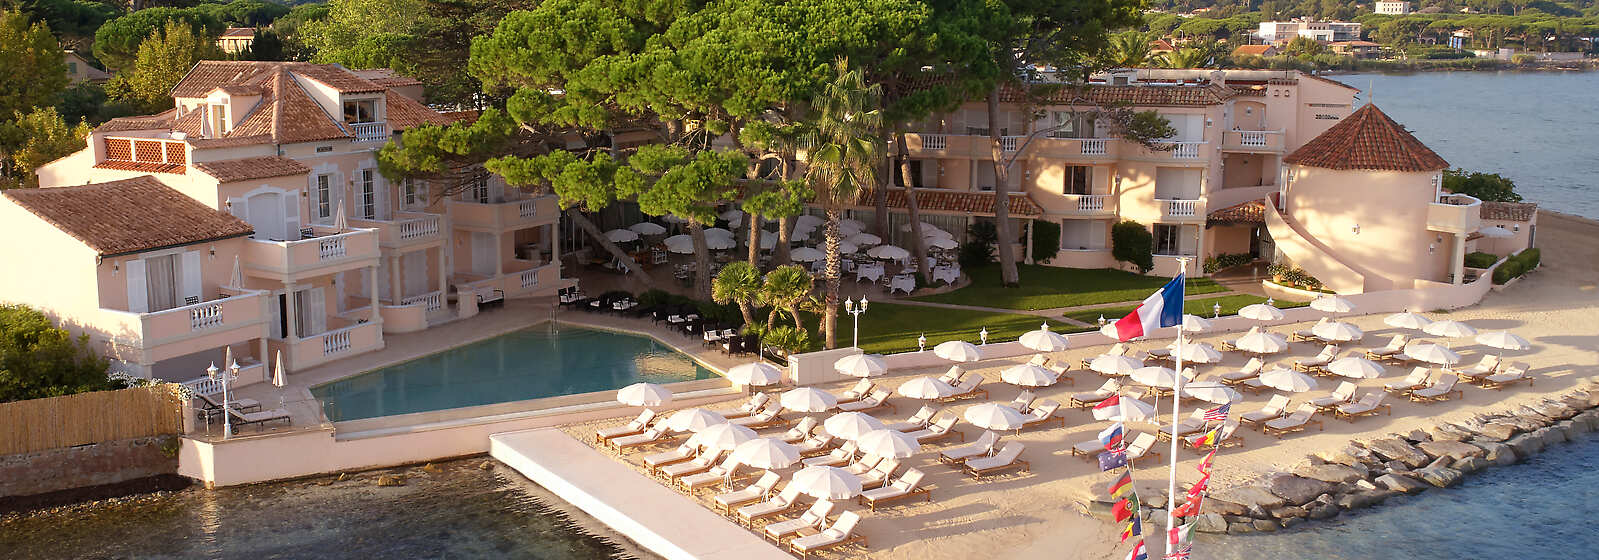 Cheval Blanc St-Tropez, the only hotel in Saint-Tropez with its own beach